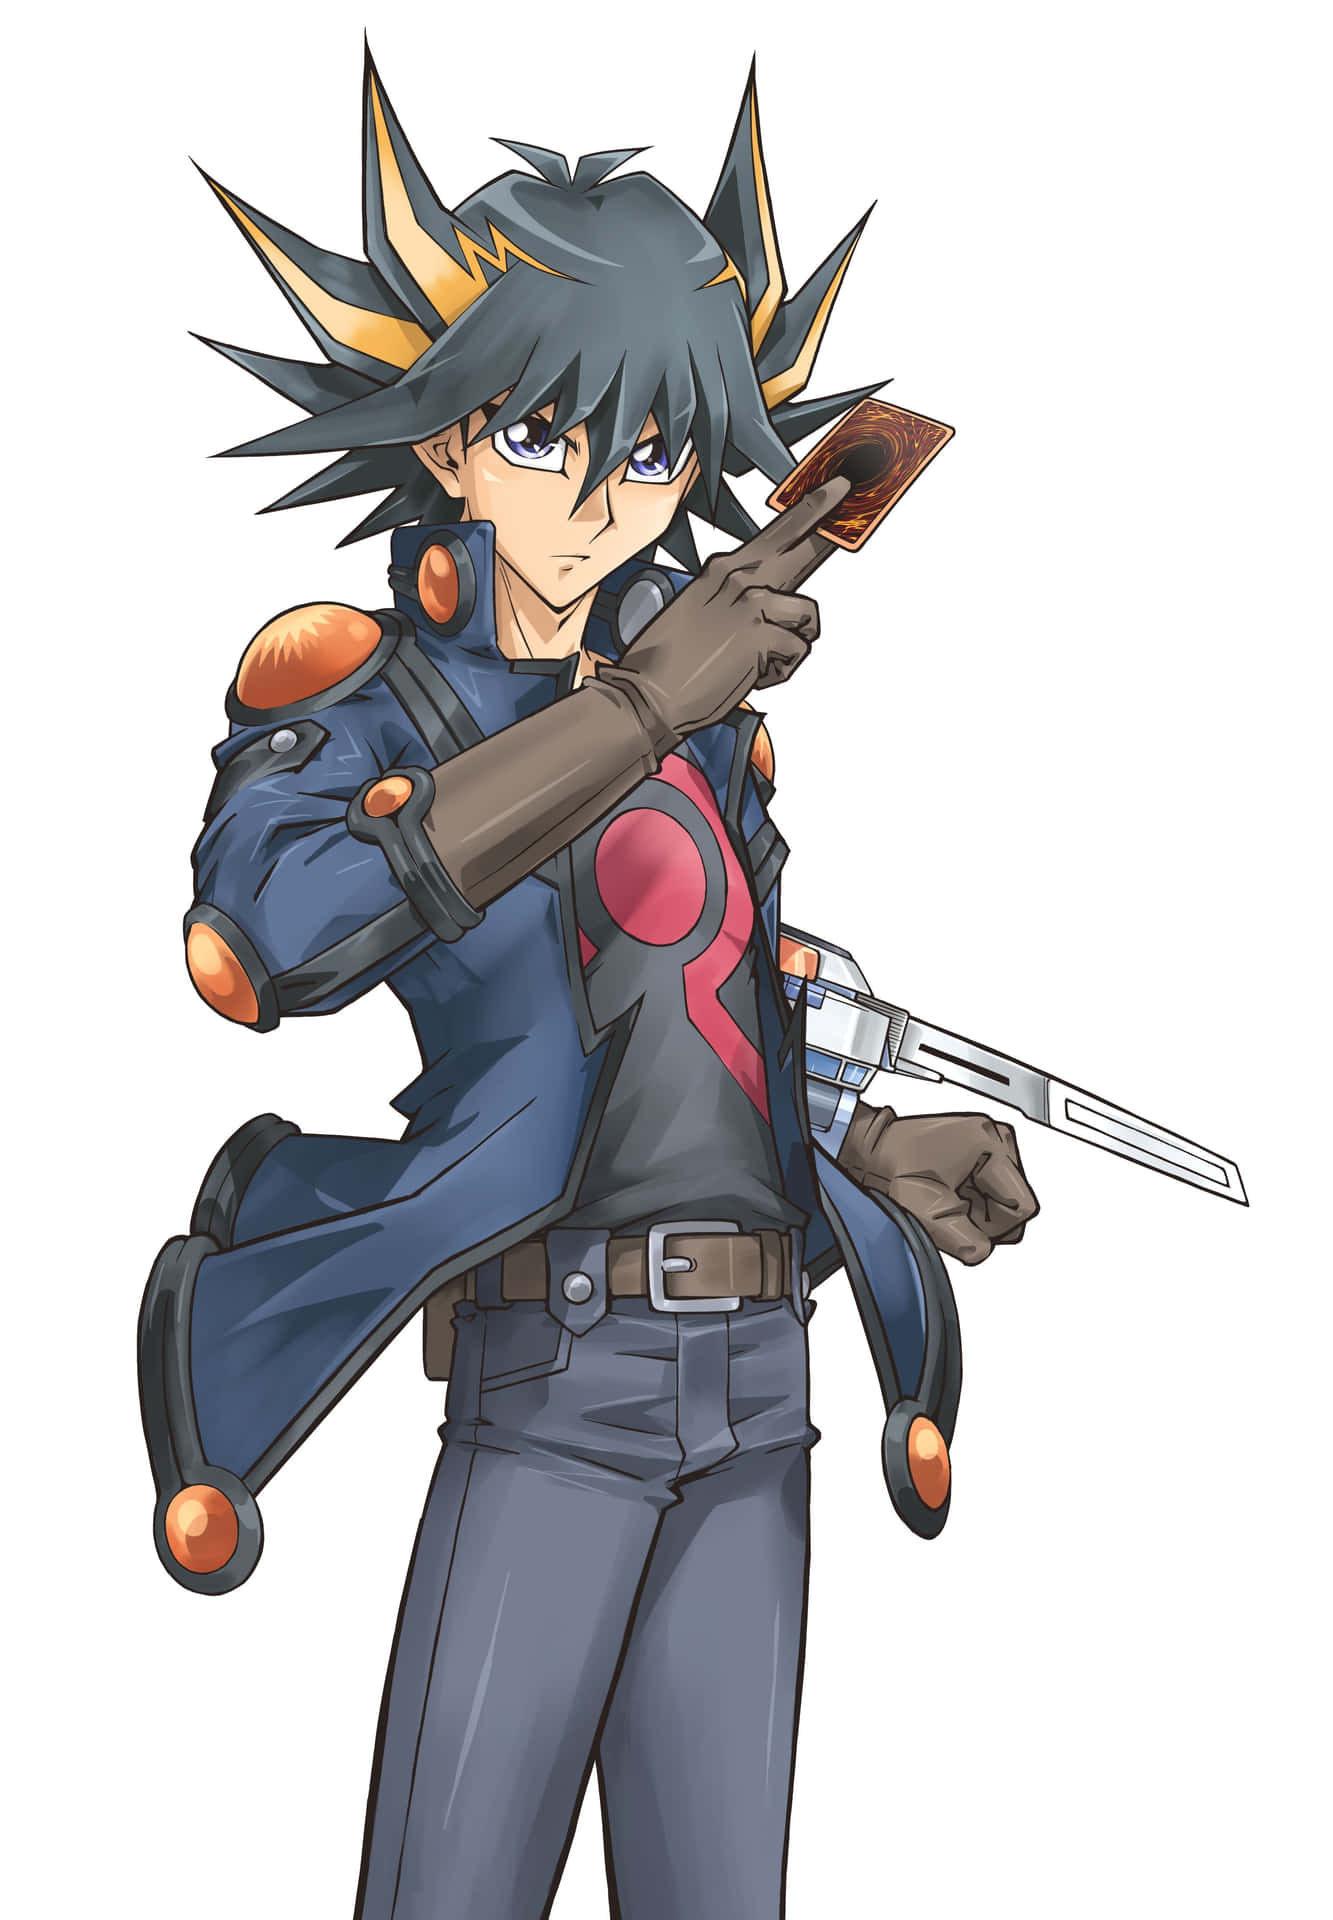 Yusei Fudo from Yu-Gi-Oh! 5D's in an intense duel against powerful opponents Wallpaper